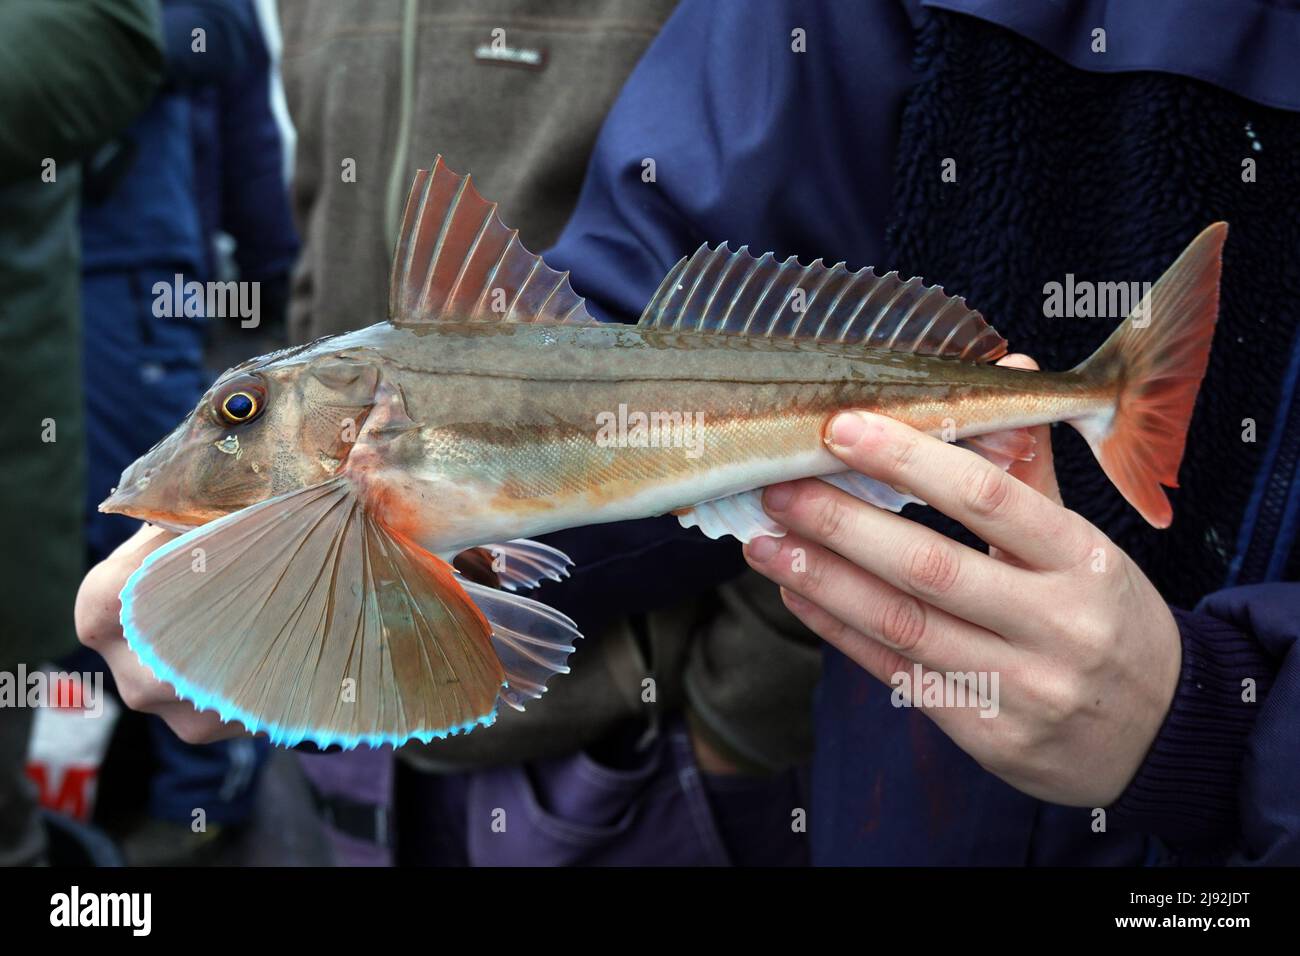 04.01.2022, Helsingborg, Skane lakes, Sweden - Red gurnard in the hand of an angler. 00S220104D160CAROEX.JPG [MODEL RELEASE: NO, PROPERTY RELEASE: NO Stock Photo